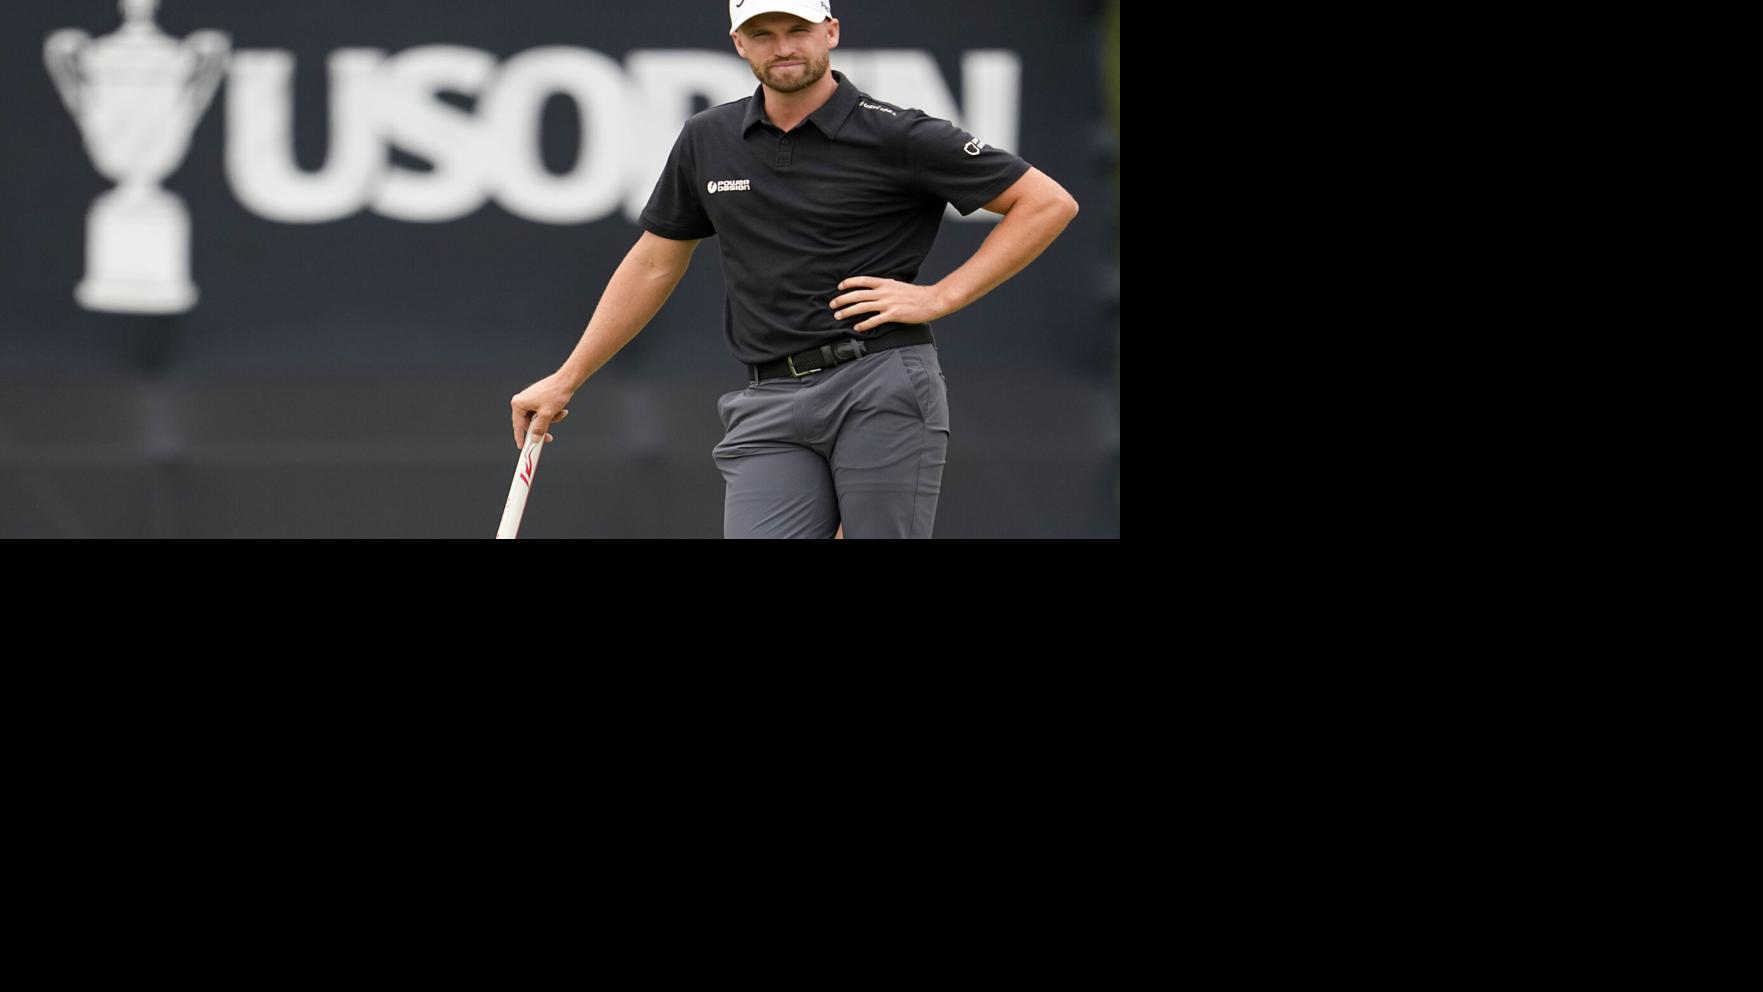 Wyndham Clark, Rory McIlroy set pace in 2nd round of US Open